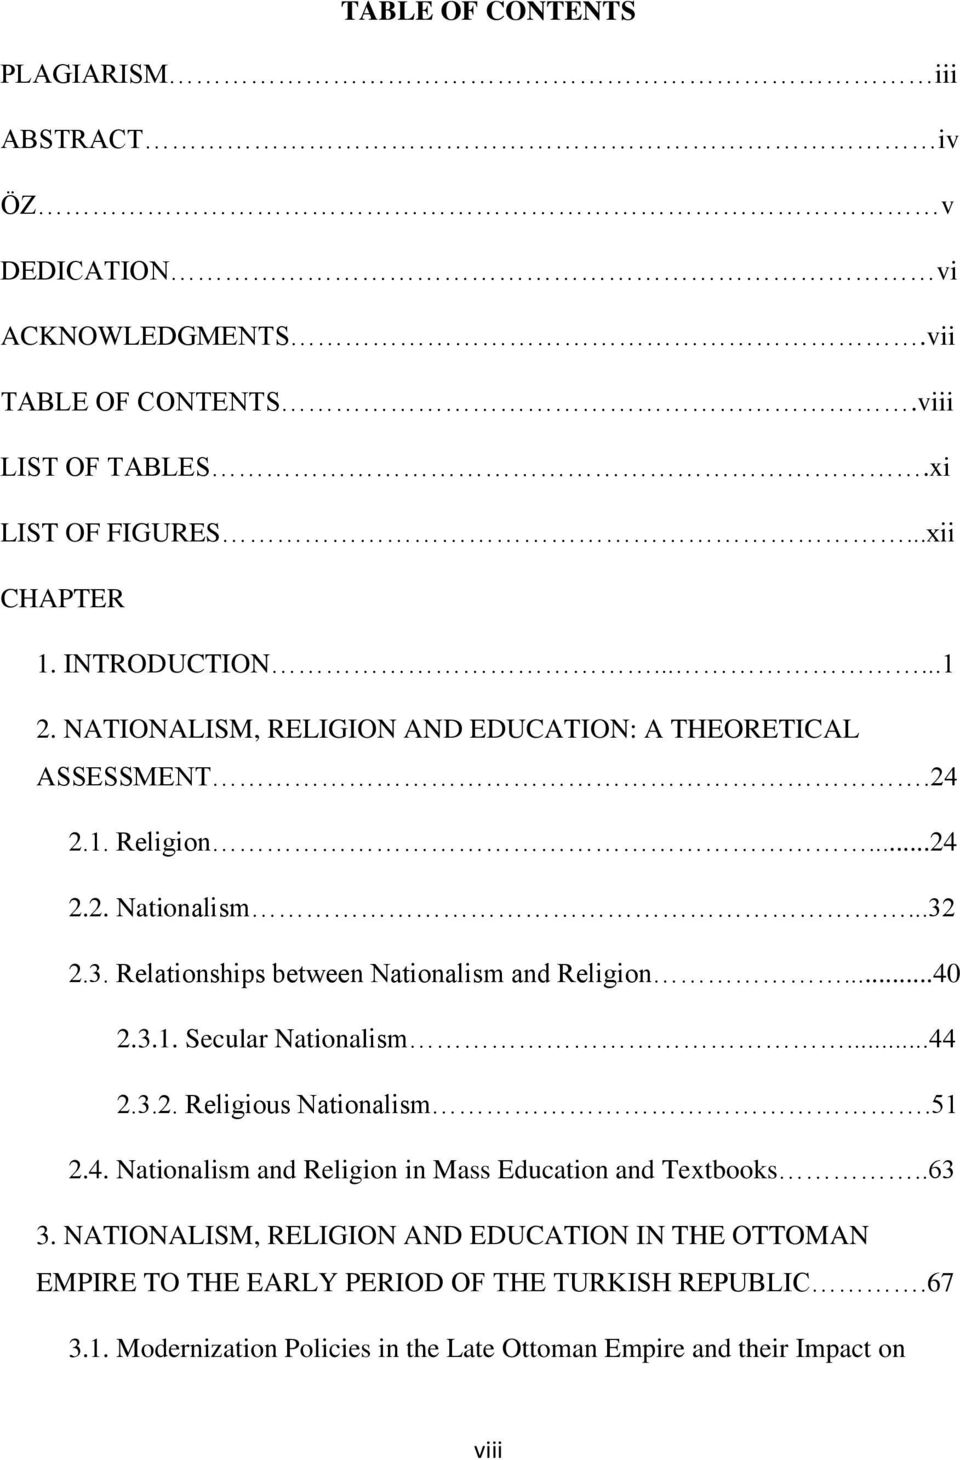 2.3. Relationships between Nationalism and Religion...40 2.3.1. Secular Nationalism...44 2.3.2. Religious Nationalism.51 2.4. Nationalism and Religion in Mass Education and Textbooks.